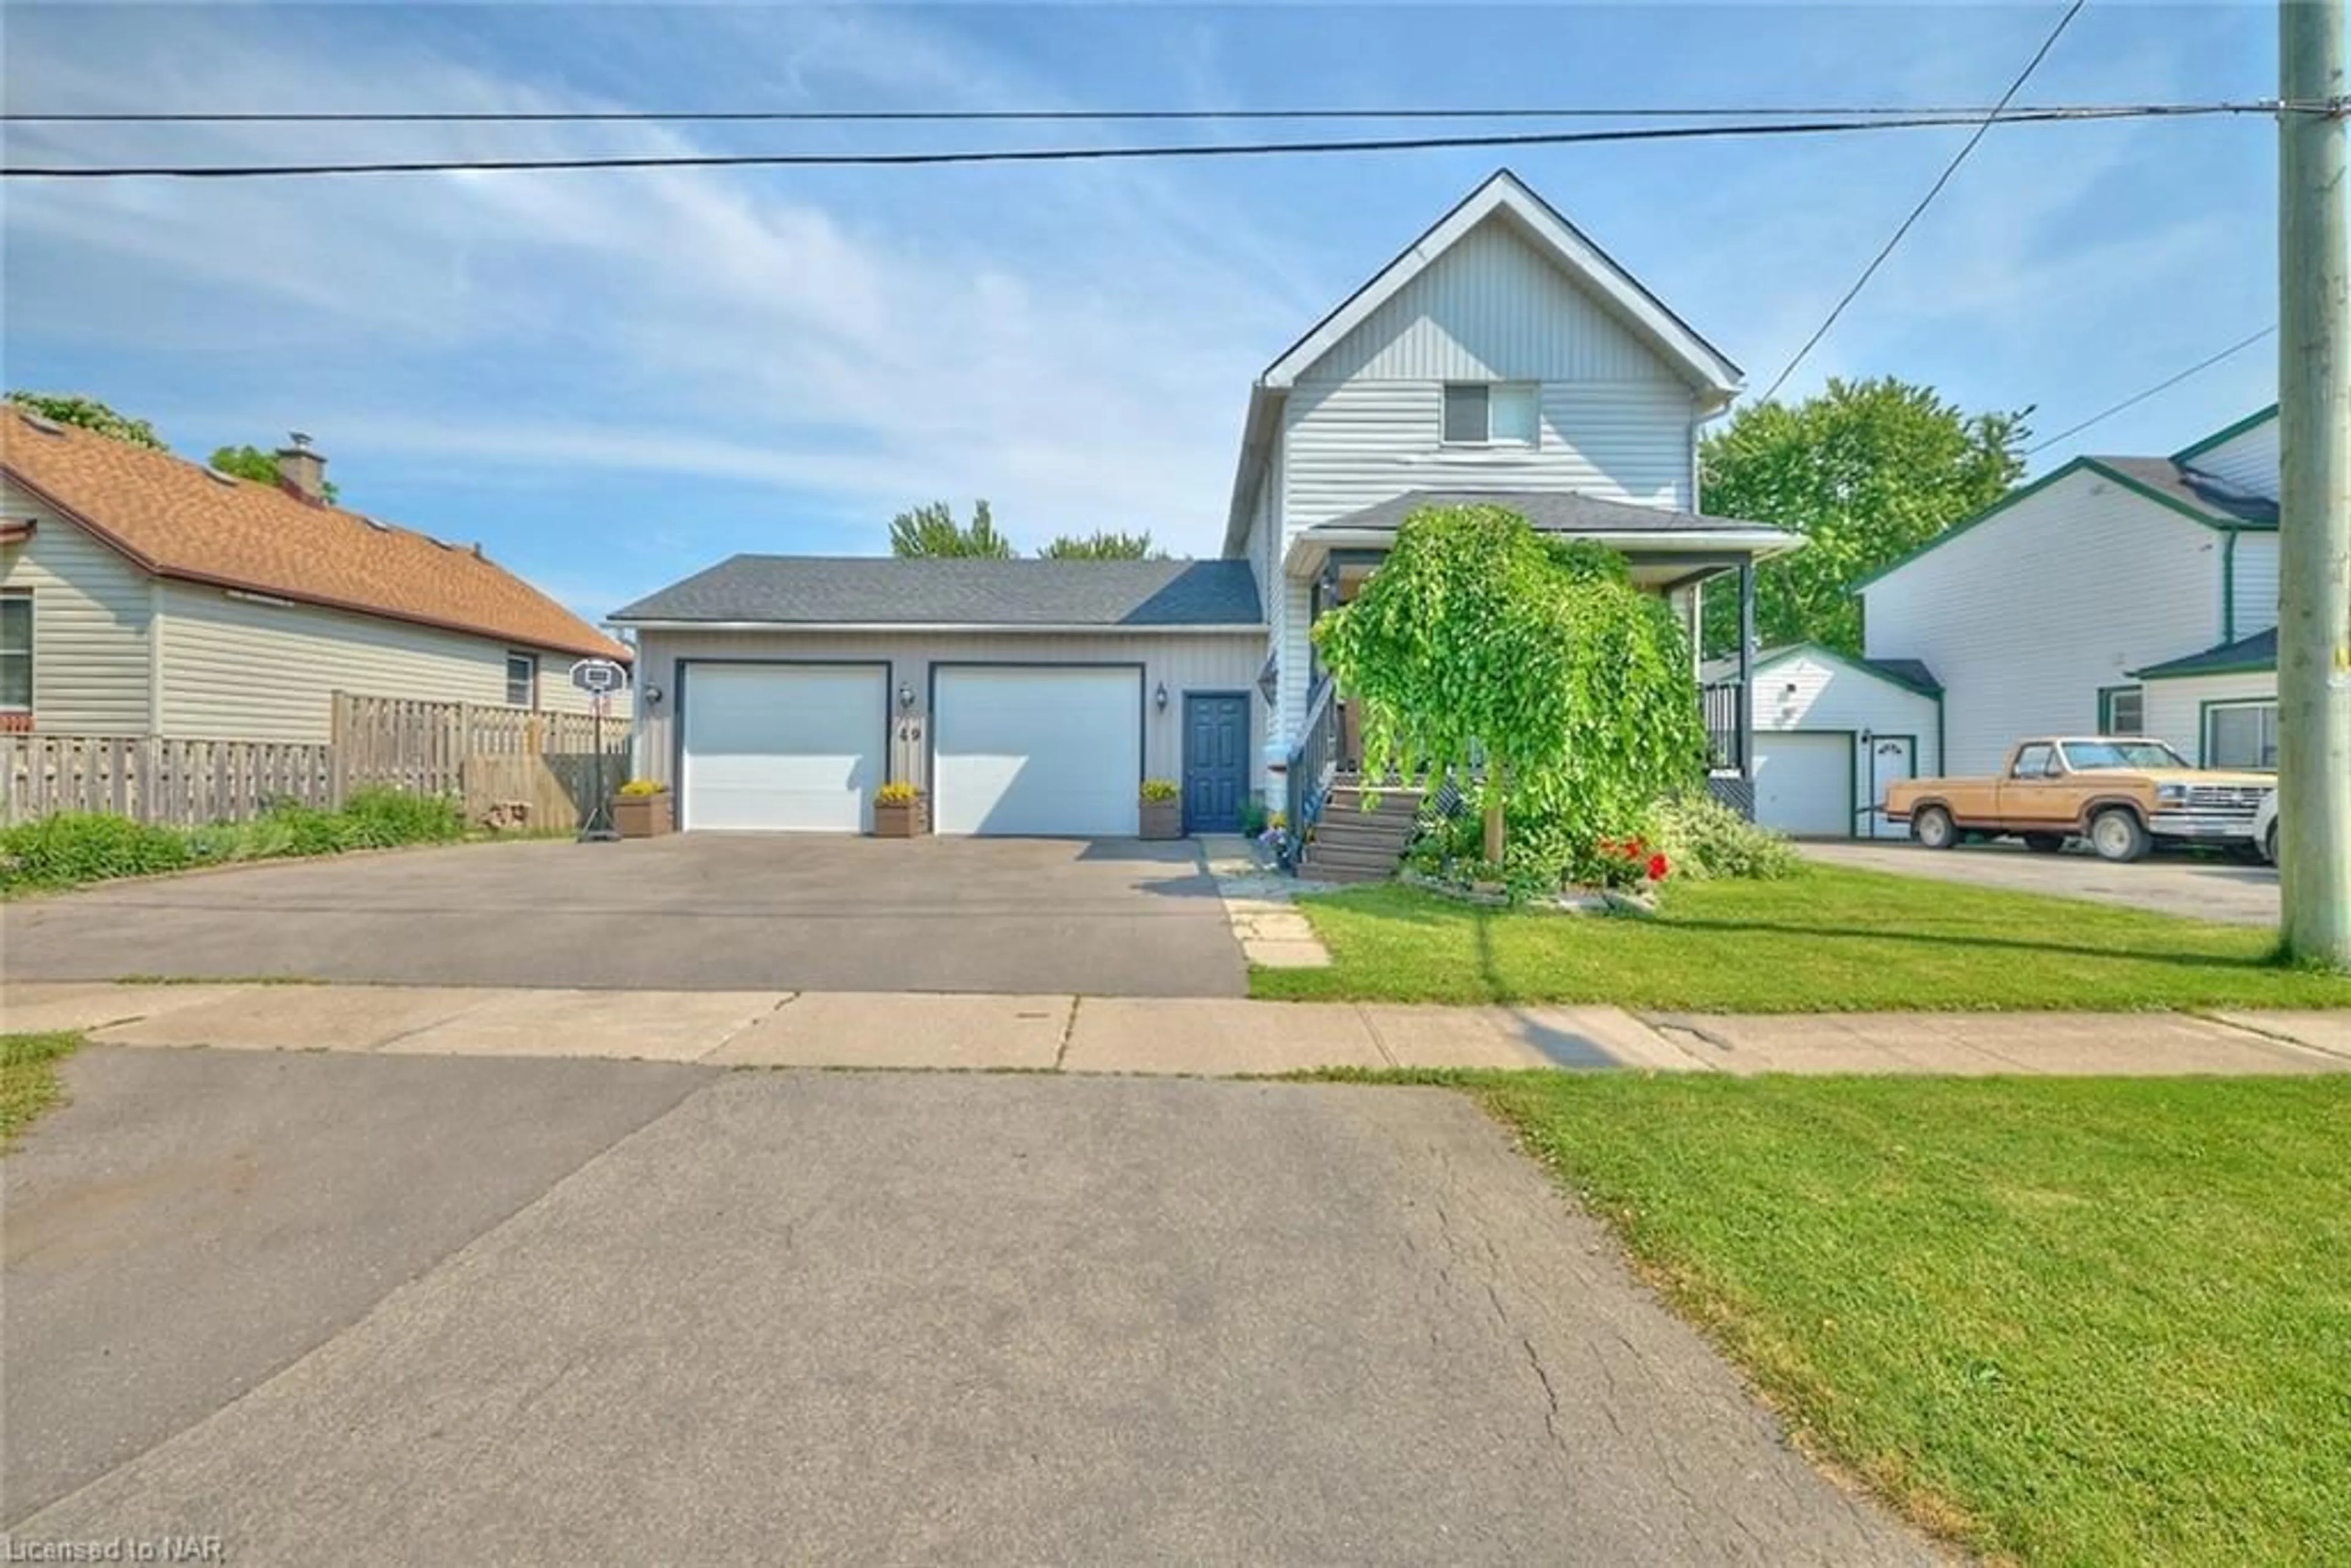 Frontside or backside of a home for 49 St George St, Welland Ontario L3C 5N1